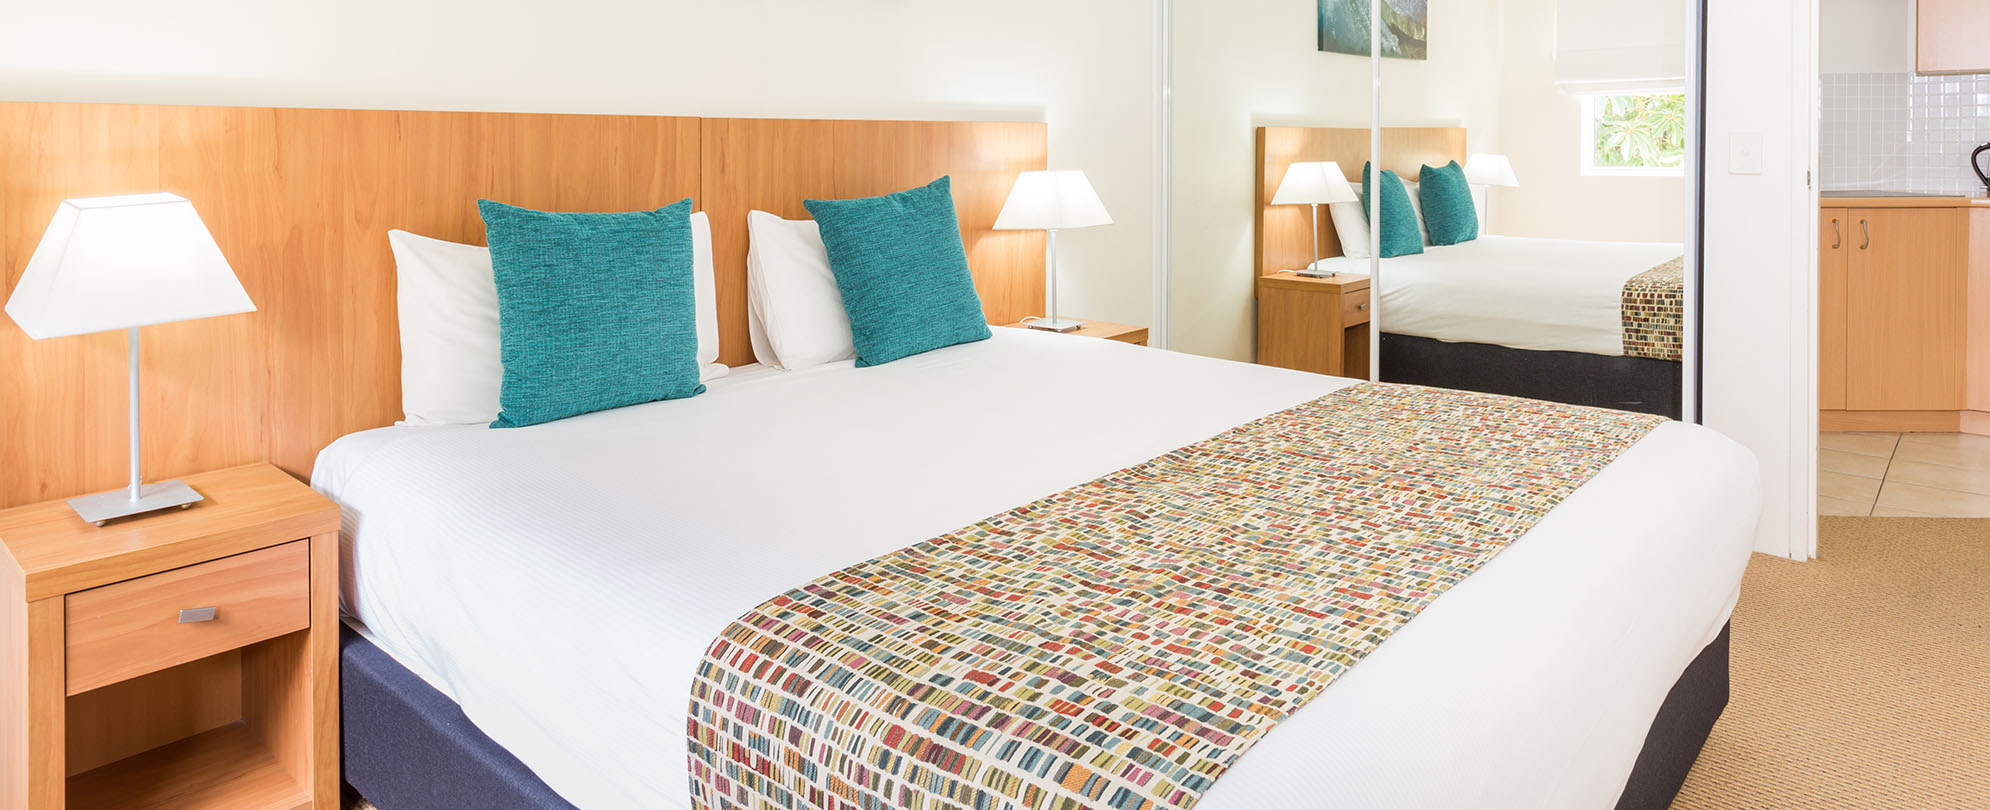 A king-sized bed in a studio suite at Club Wyndham Shoal Bay.